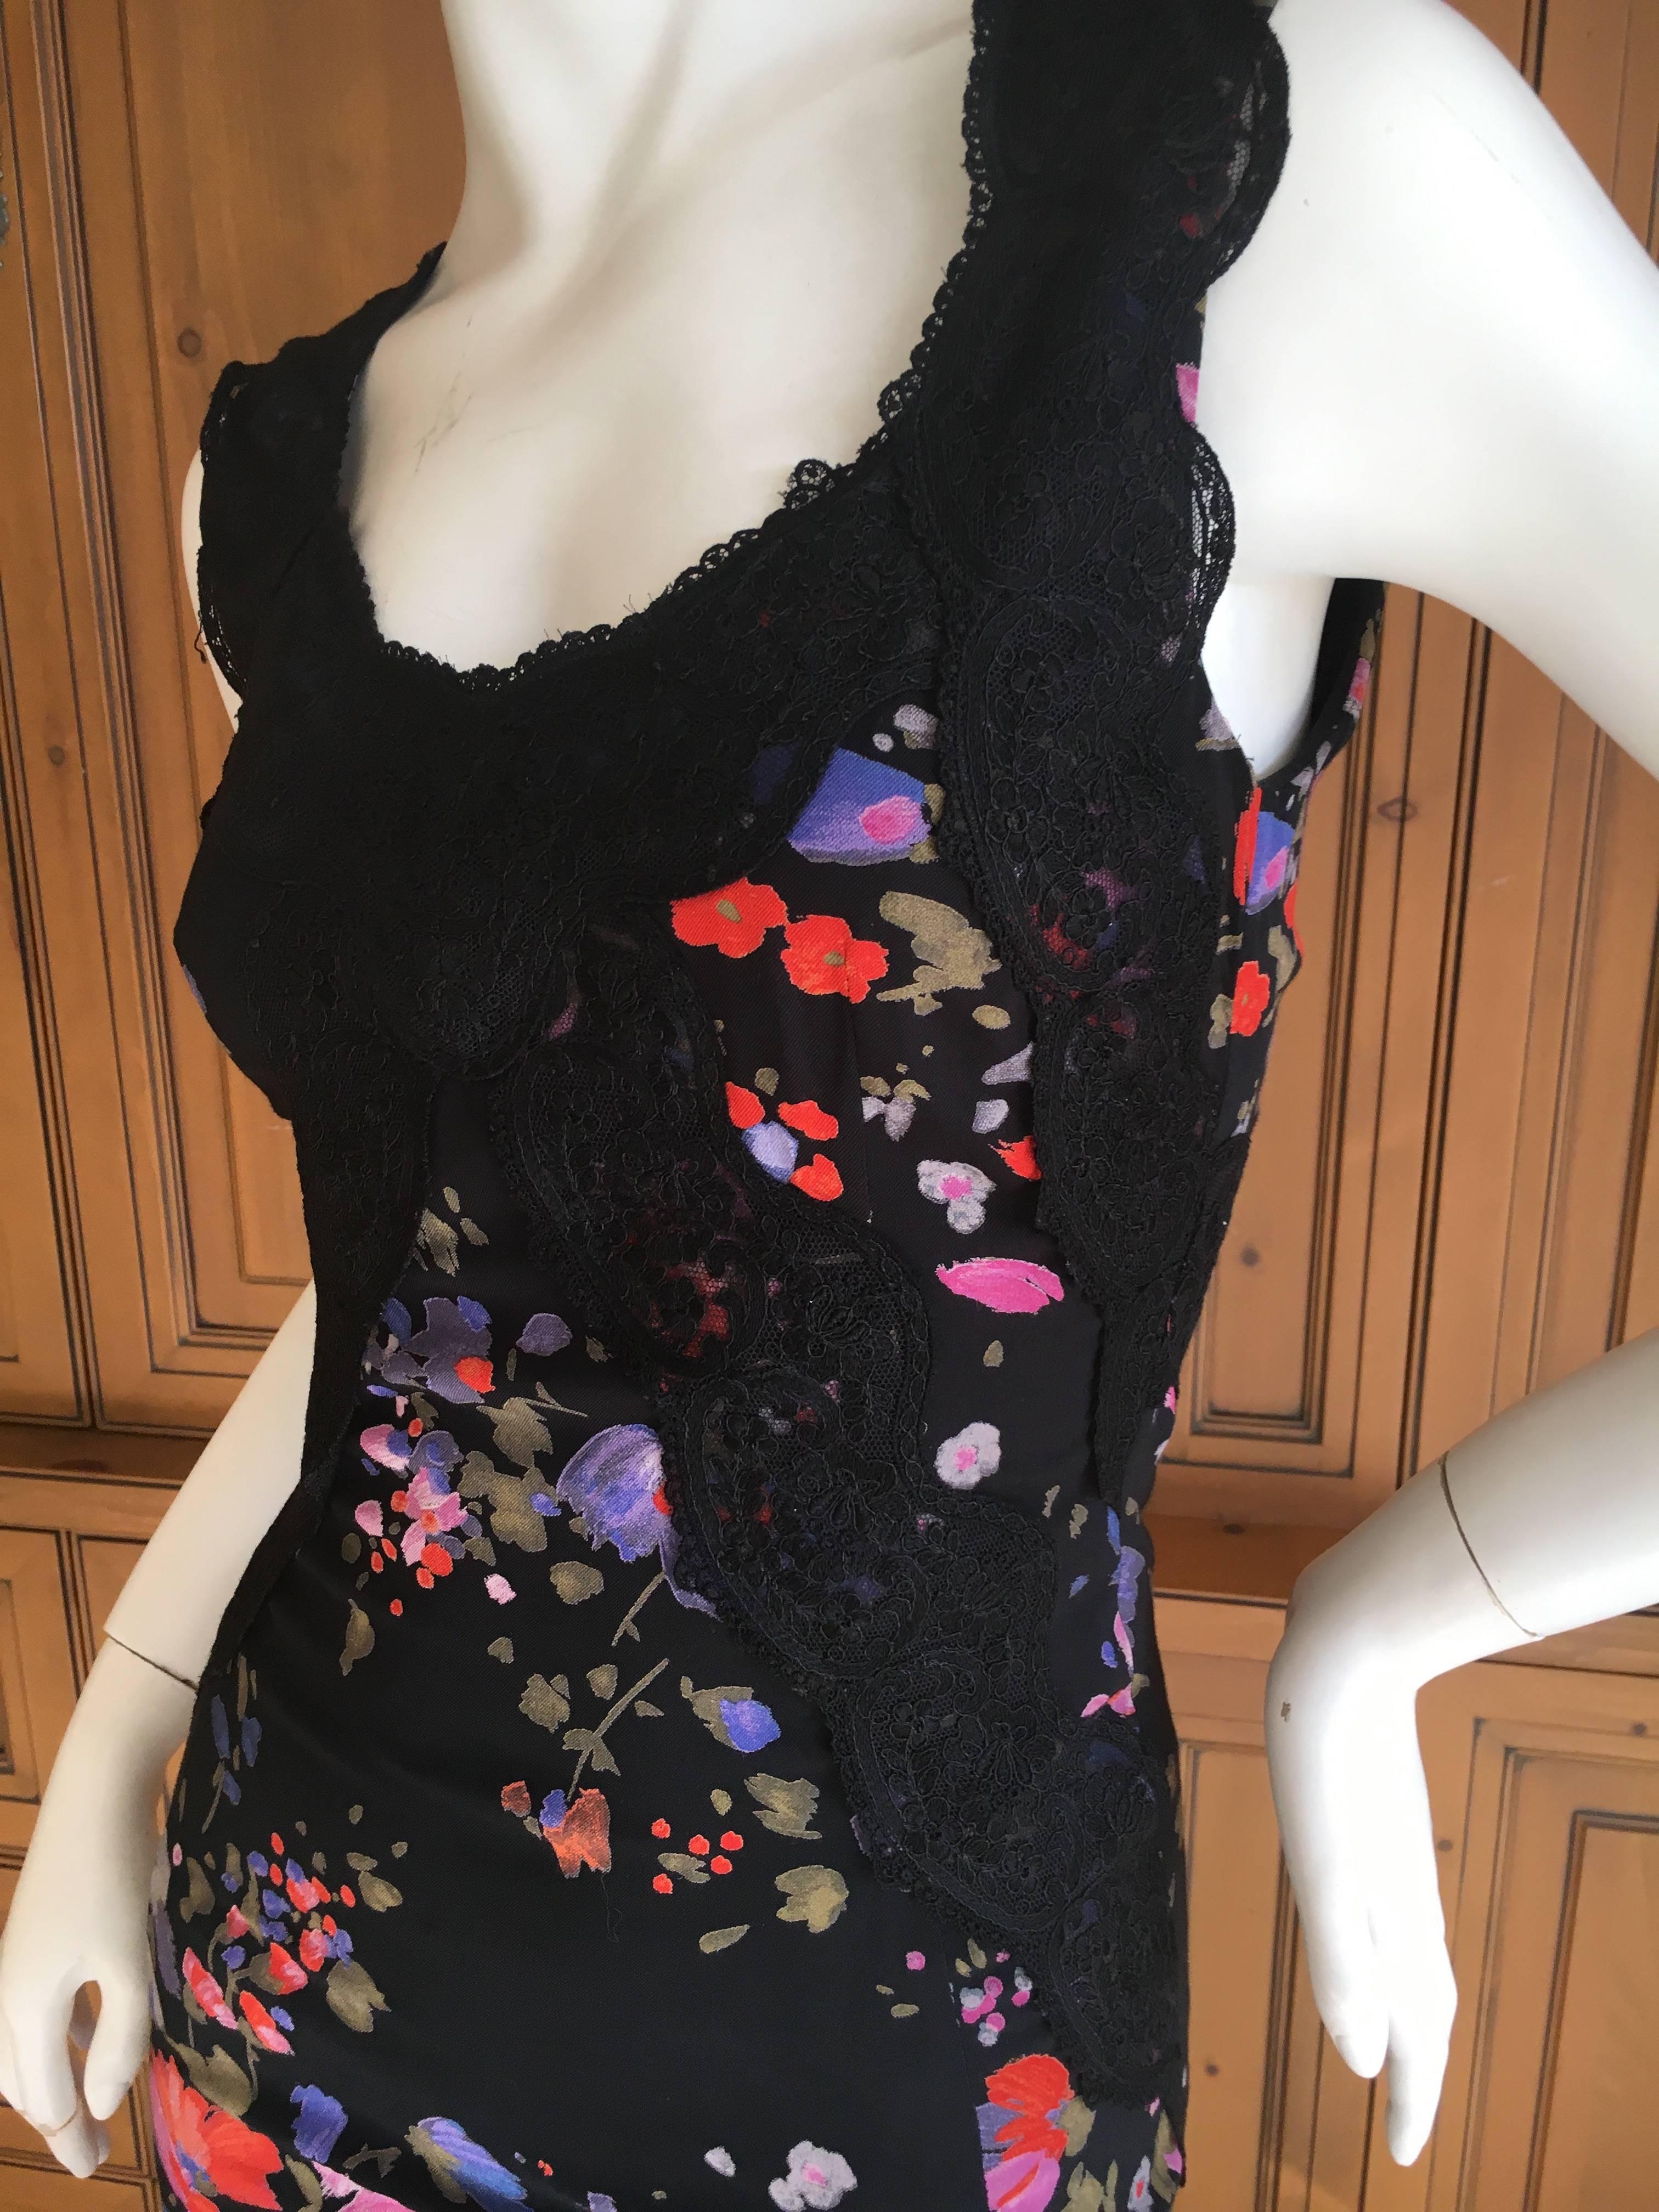 D&G Dolce & Gabbana Vintage Lace Trim Floral Dress.
Lots of cling to this sexy dress.
Size 38
Bust 36"
Waist 26"
Hips 39"
Length 39"
Excellent condition